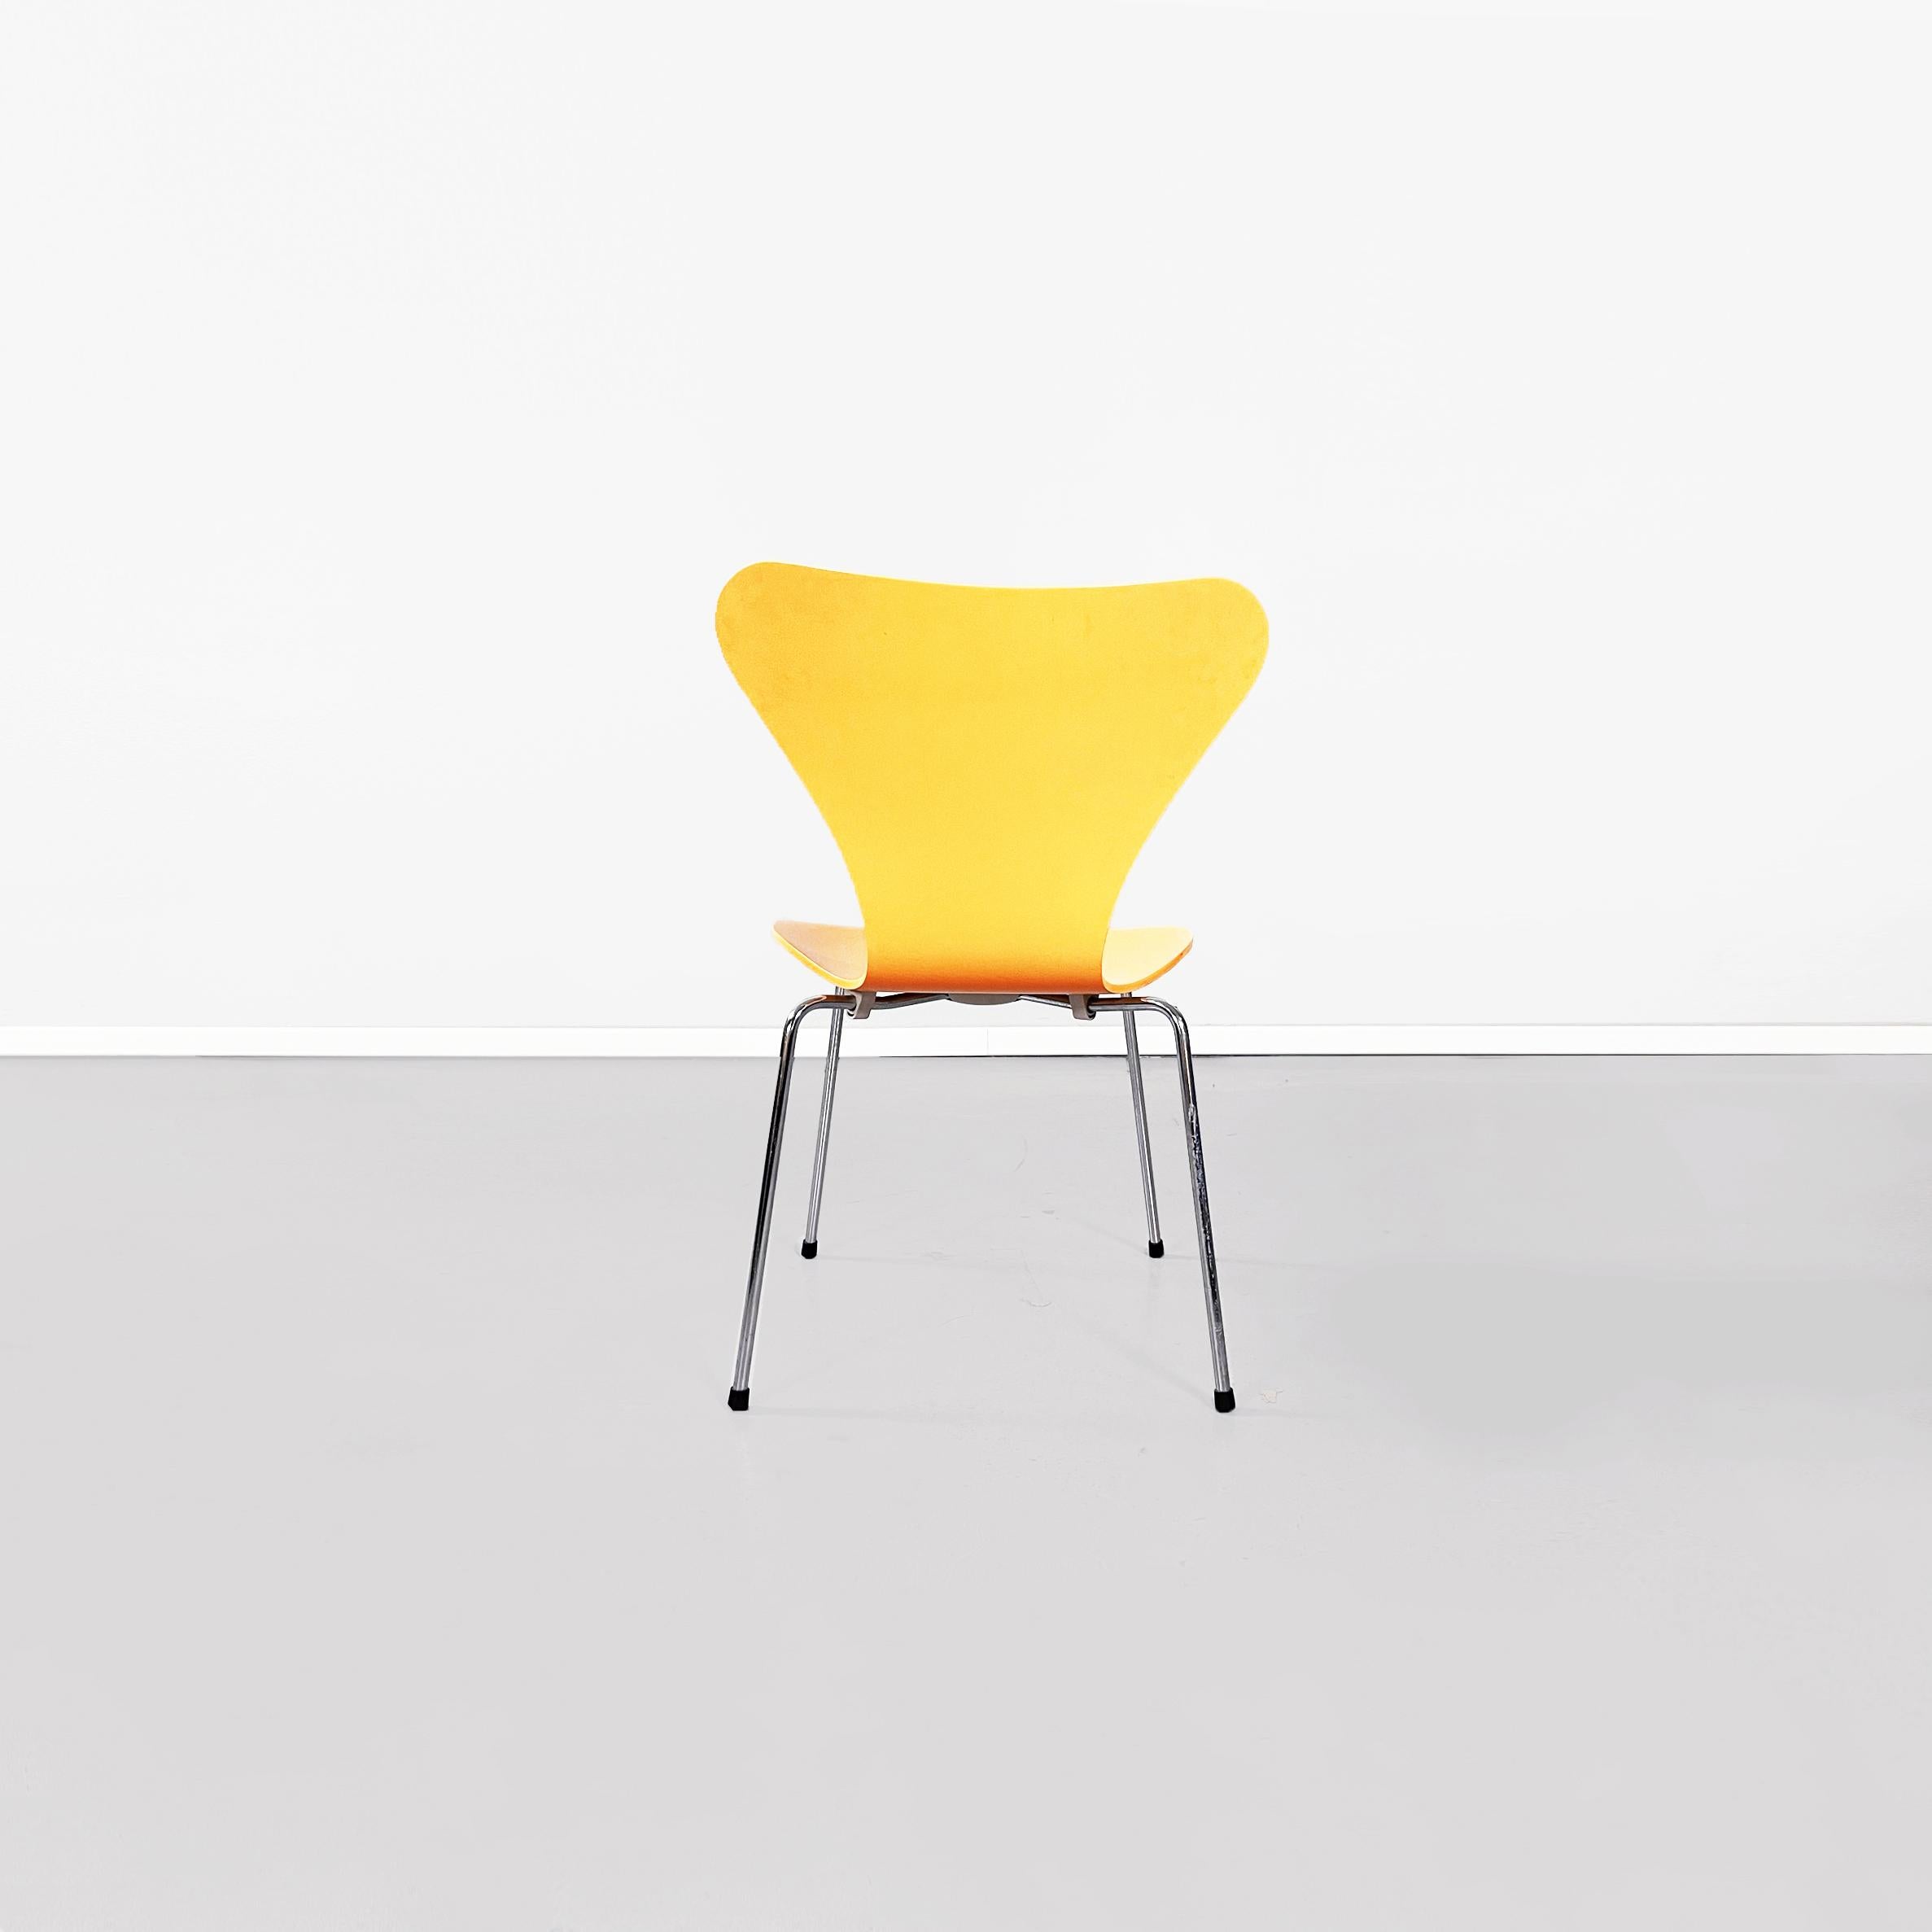 Italian Mid-century Orange wood Chairs Serie 7 by Jacobsen for Fritz Hansen, 1999 For Sale 1